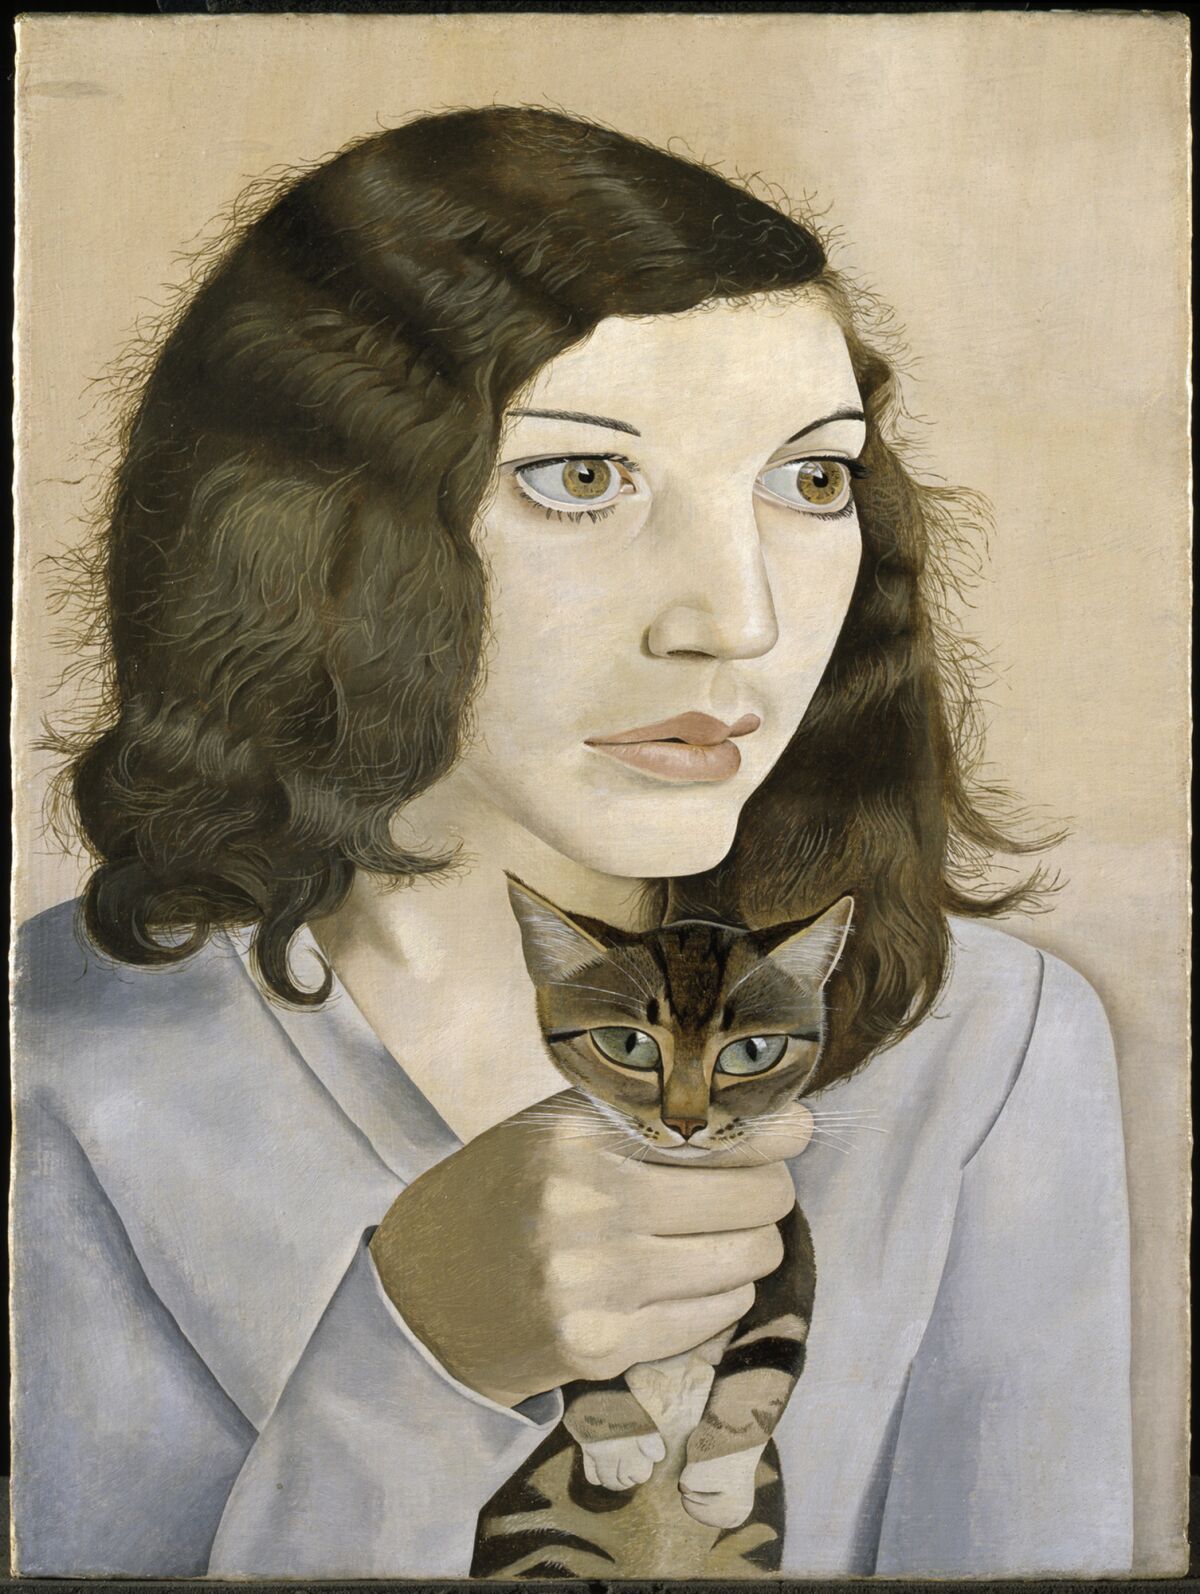 Lucian Freud, born in Berlin, embraced powerful motifs from German New Objectivity painting in his early work (Getty museum)